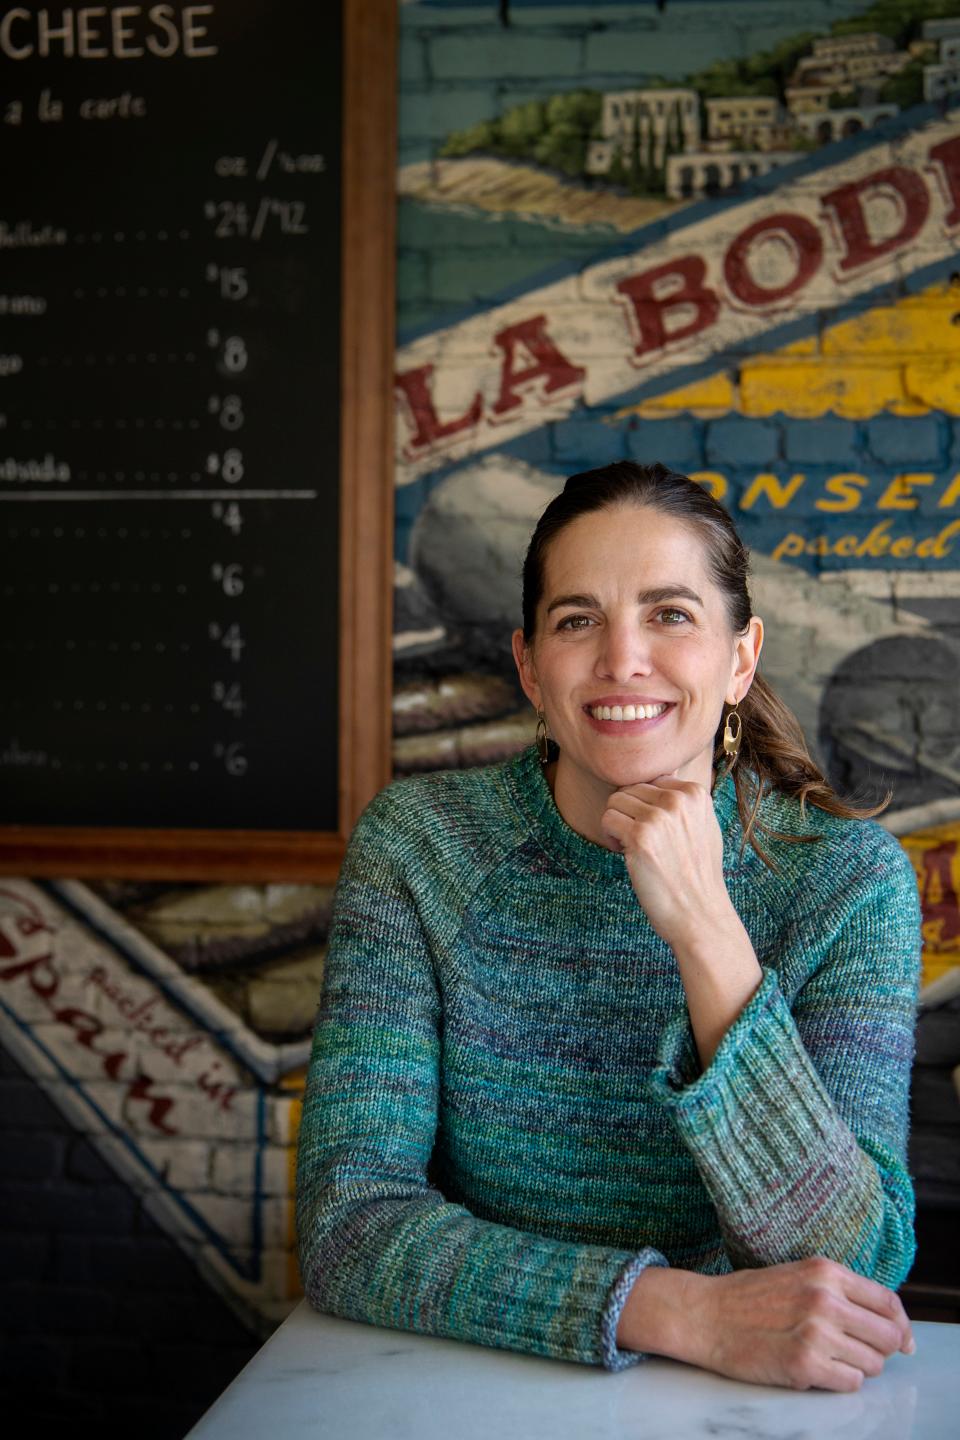 Asheville chef Katie Button is stepping down as CEO of Katie Button Restaurant Group.